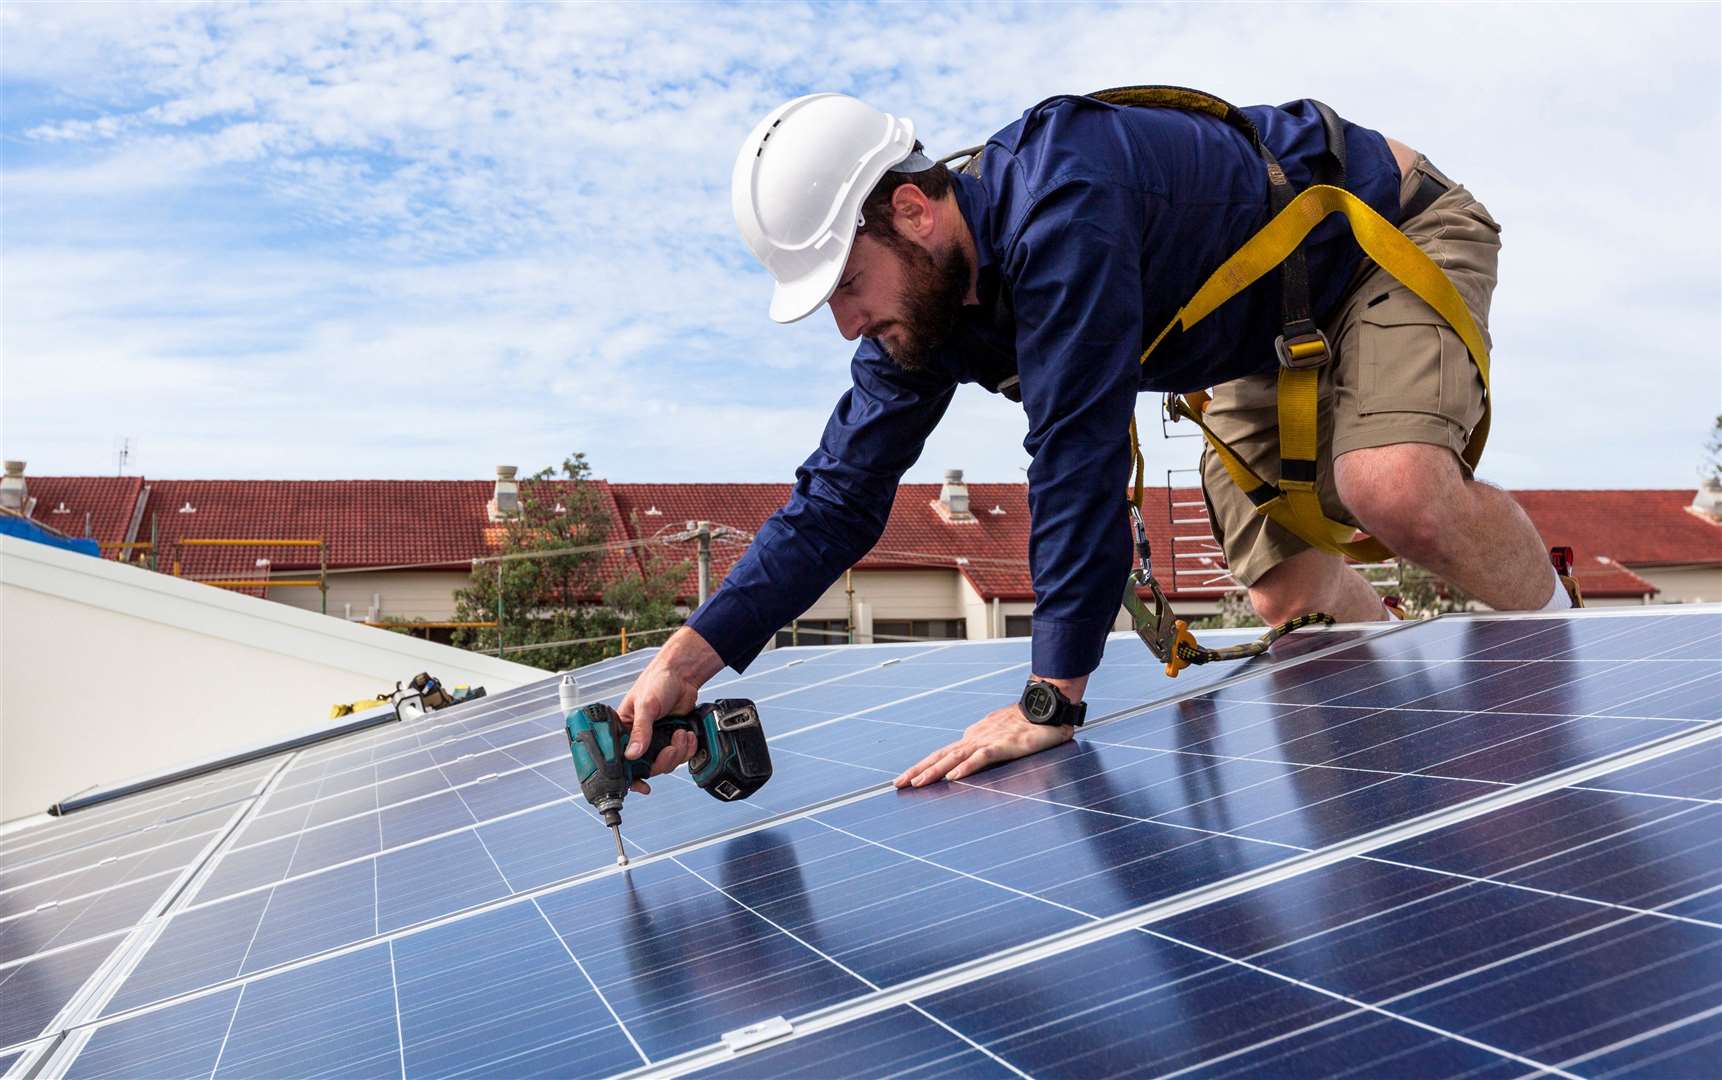 Fixing more solar panels to roofs is encouraged – but economies of scale mean only the building they are on will likely benefit